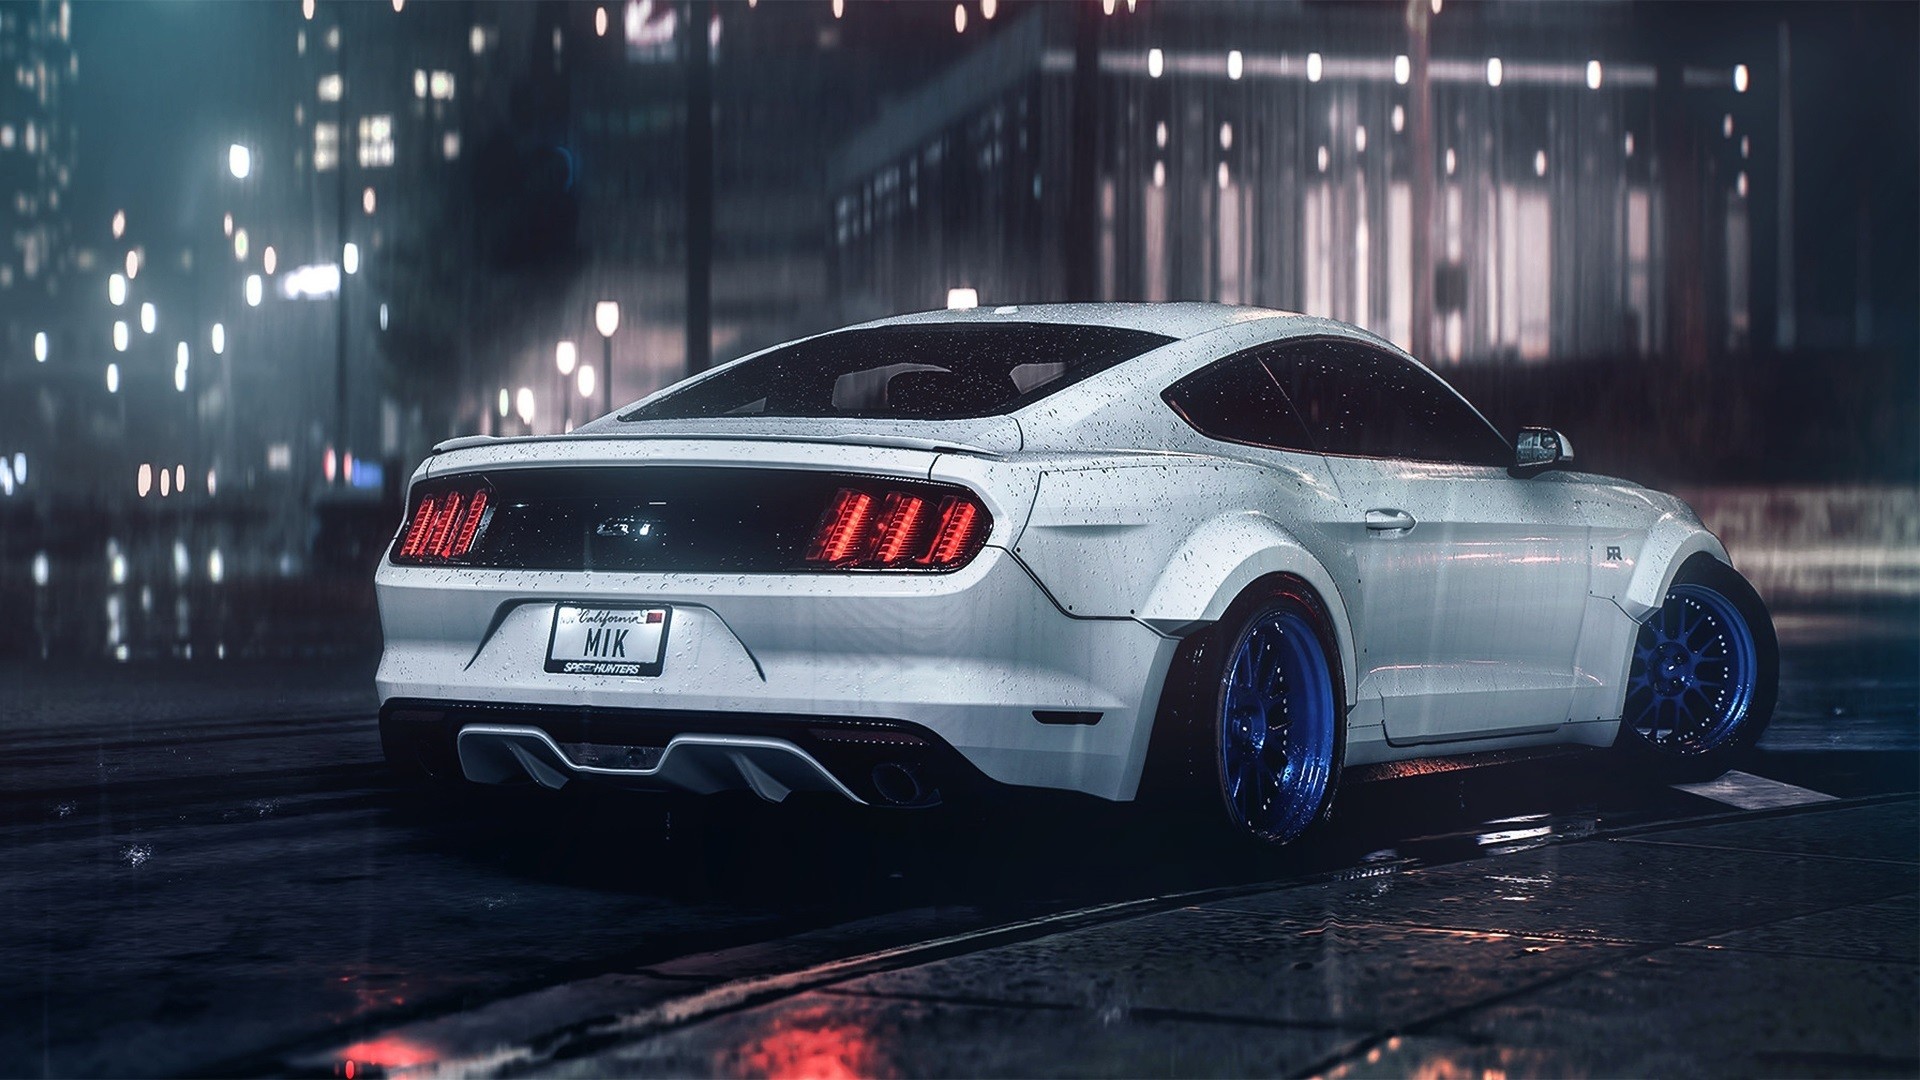 Ford Mustang Gt Wallpaper (75+ images)